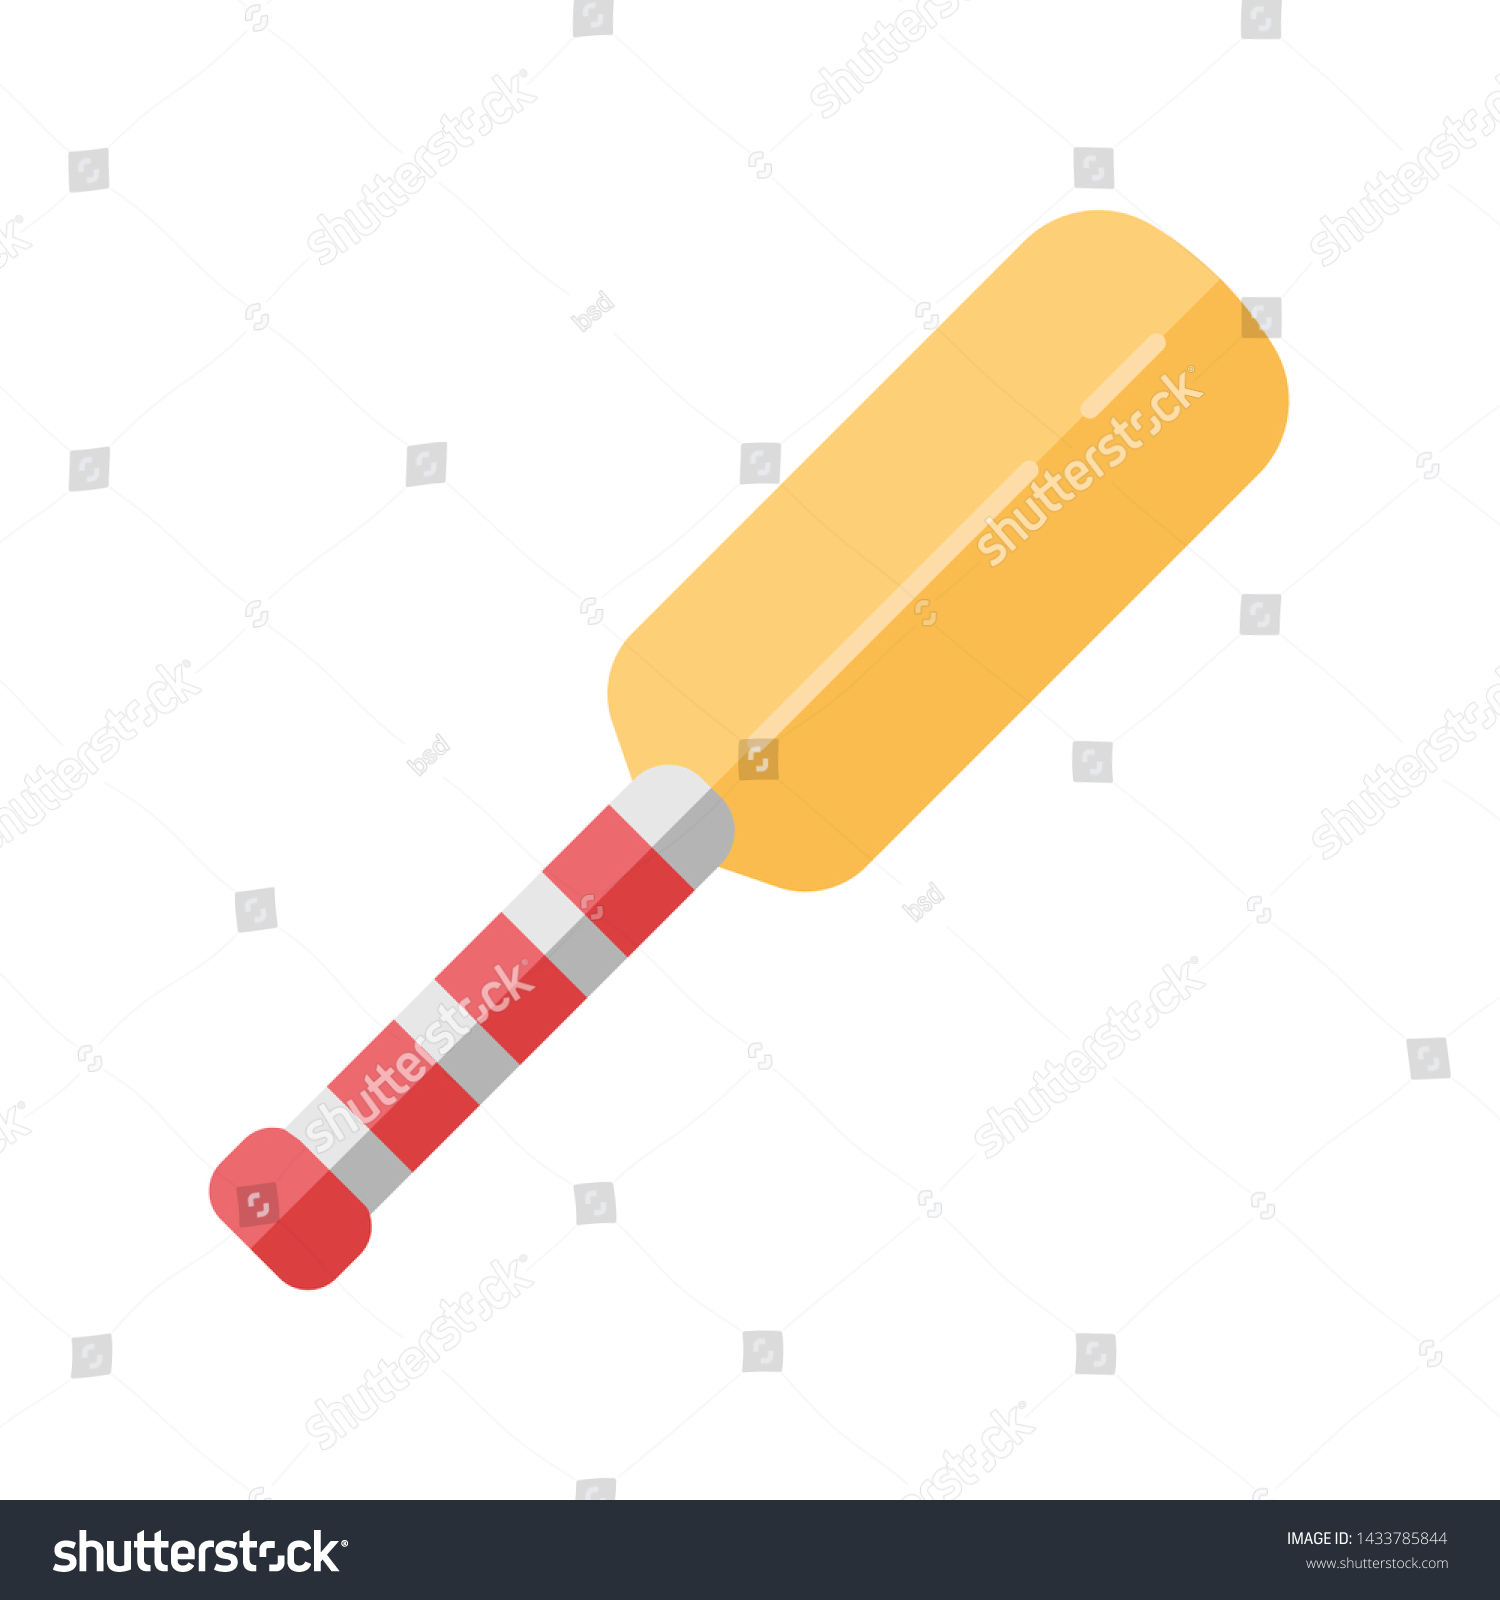 SVG of Cricket bat flat design long shadow color icon. Equipment for batsmen. Wooden block with long handle. Professional sports accessory. Game gear. Vector silhouette illustration svg